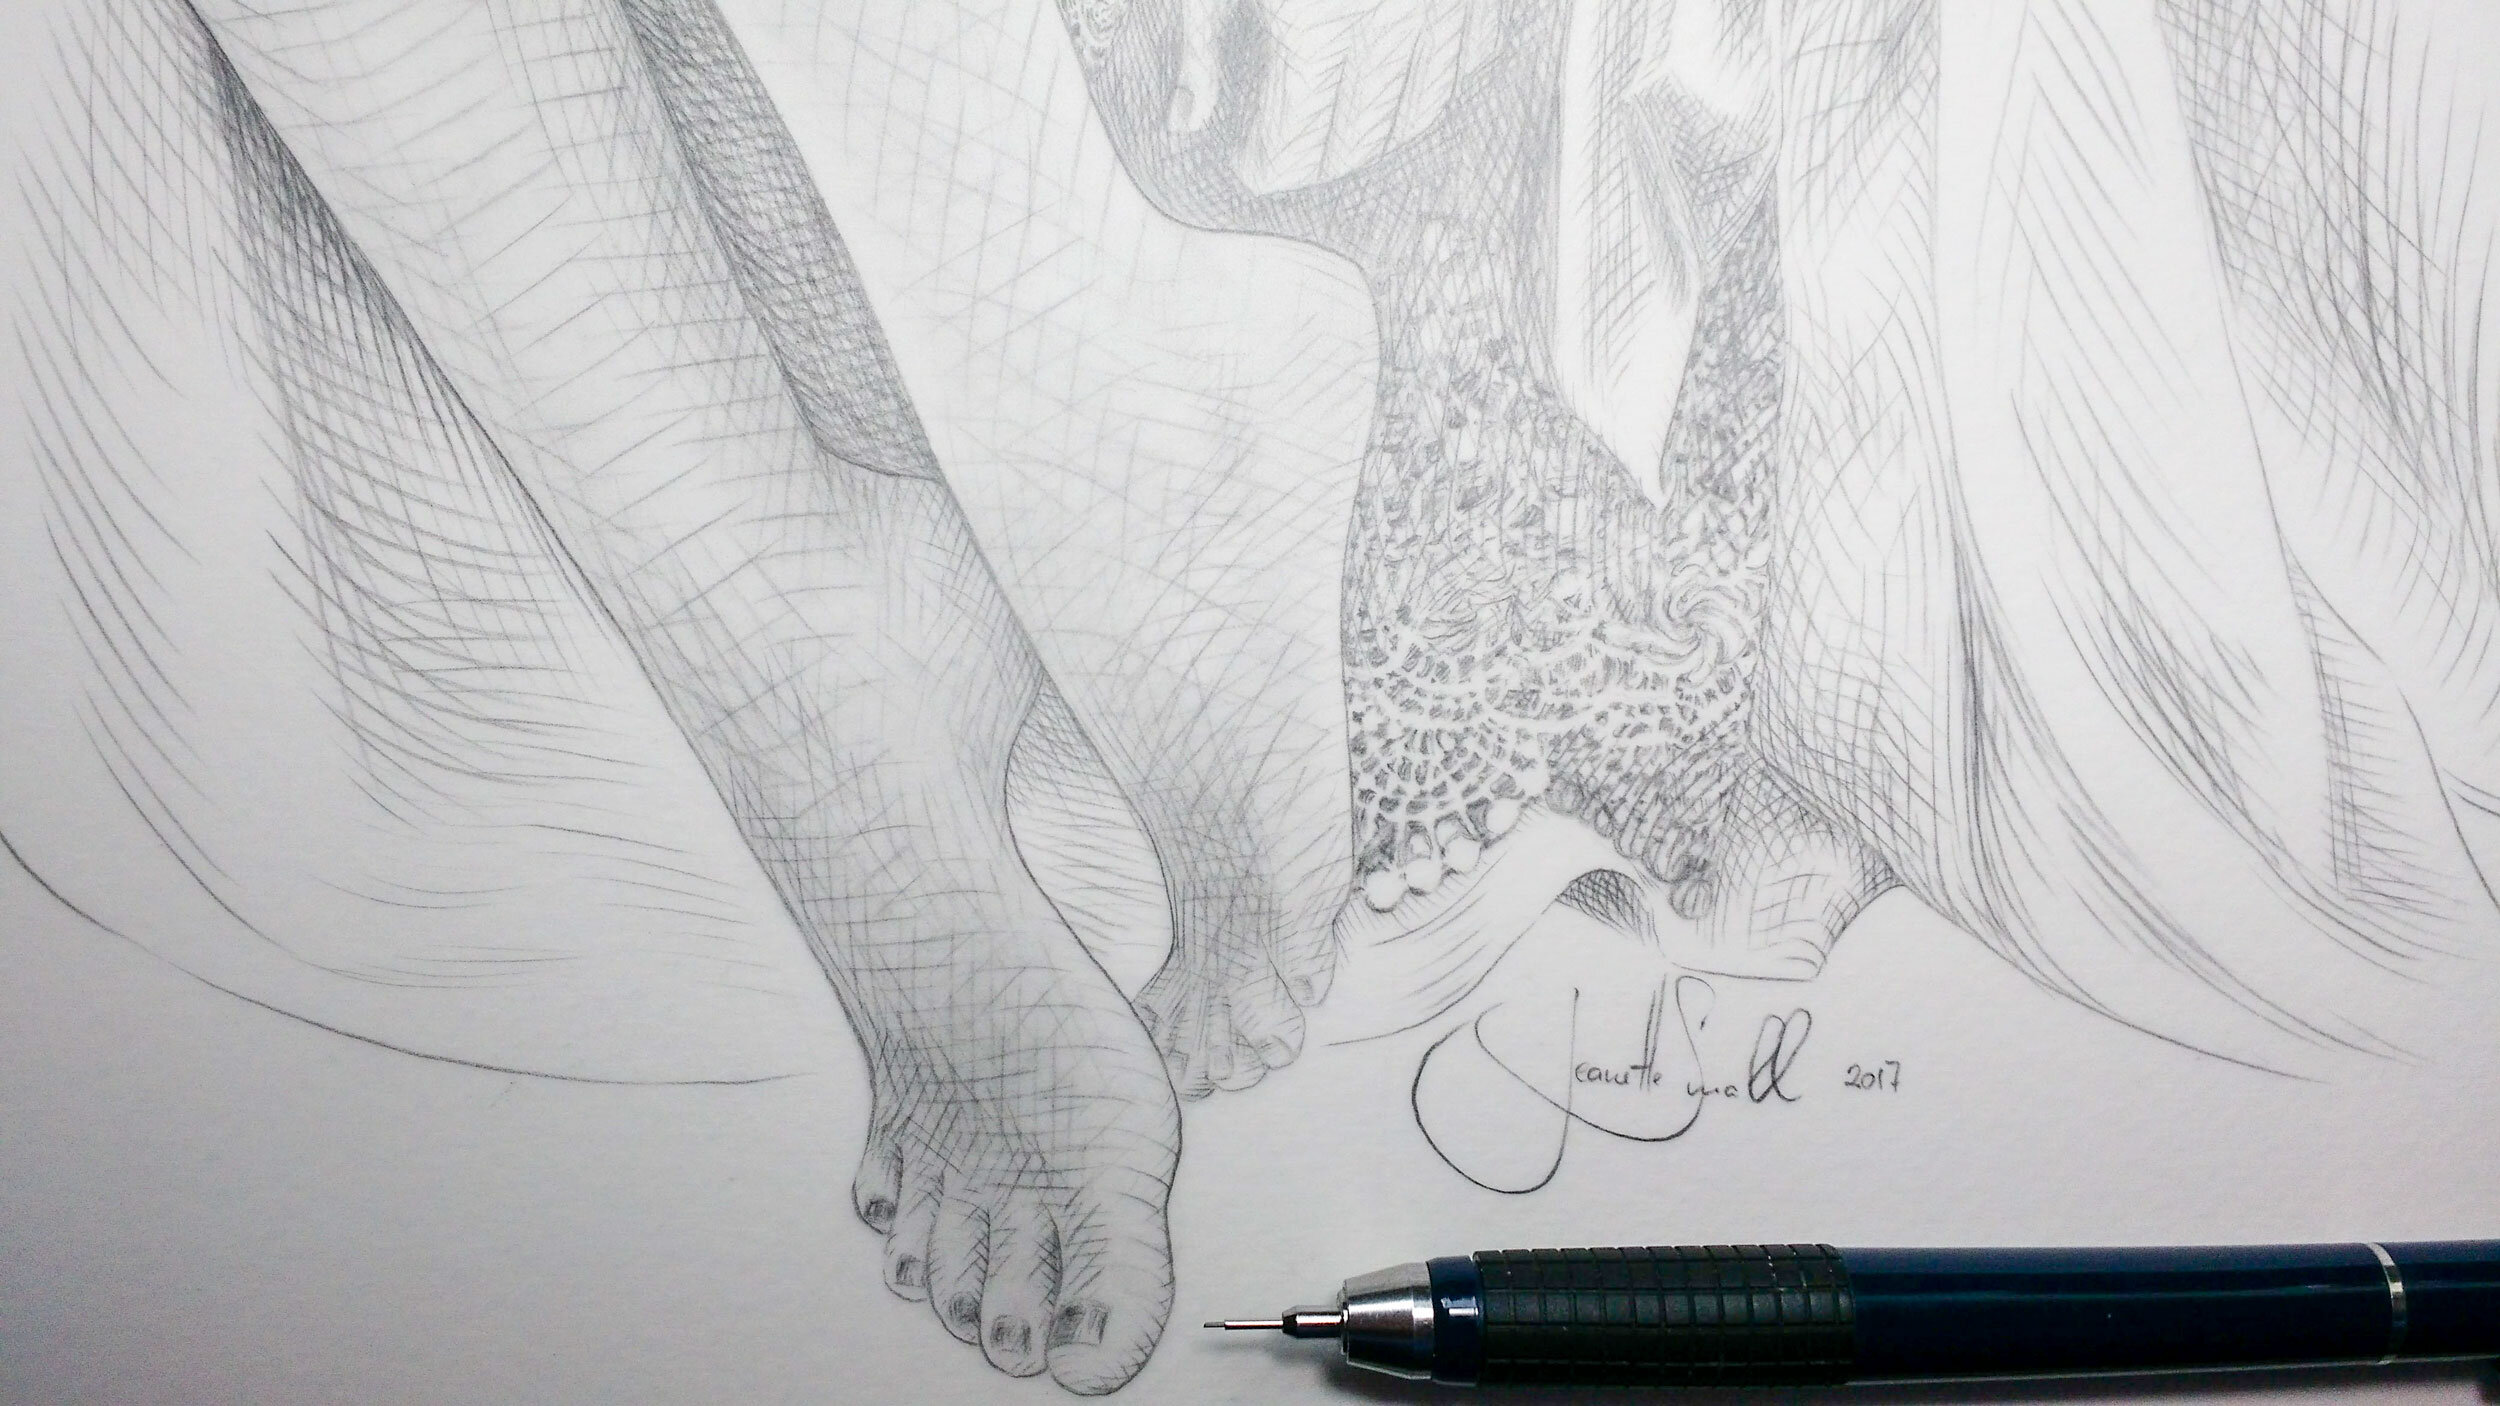 jeanette-small_2017_convergence--drawing_detail-feet-and-signature.jpg